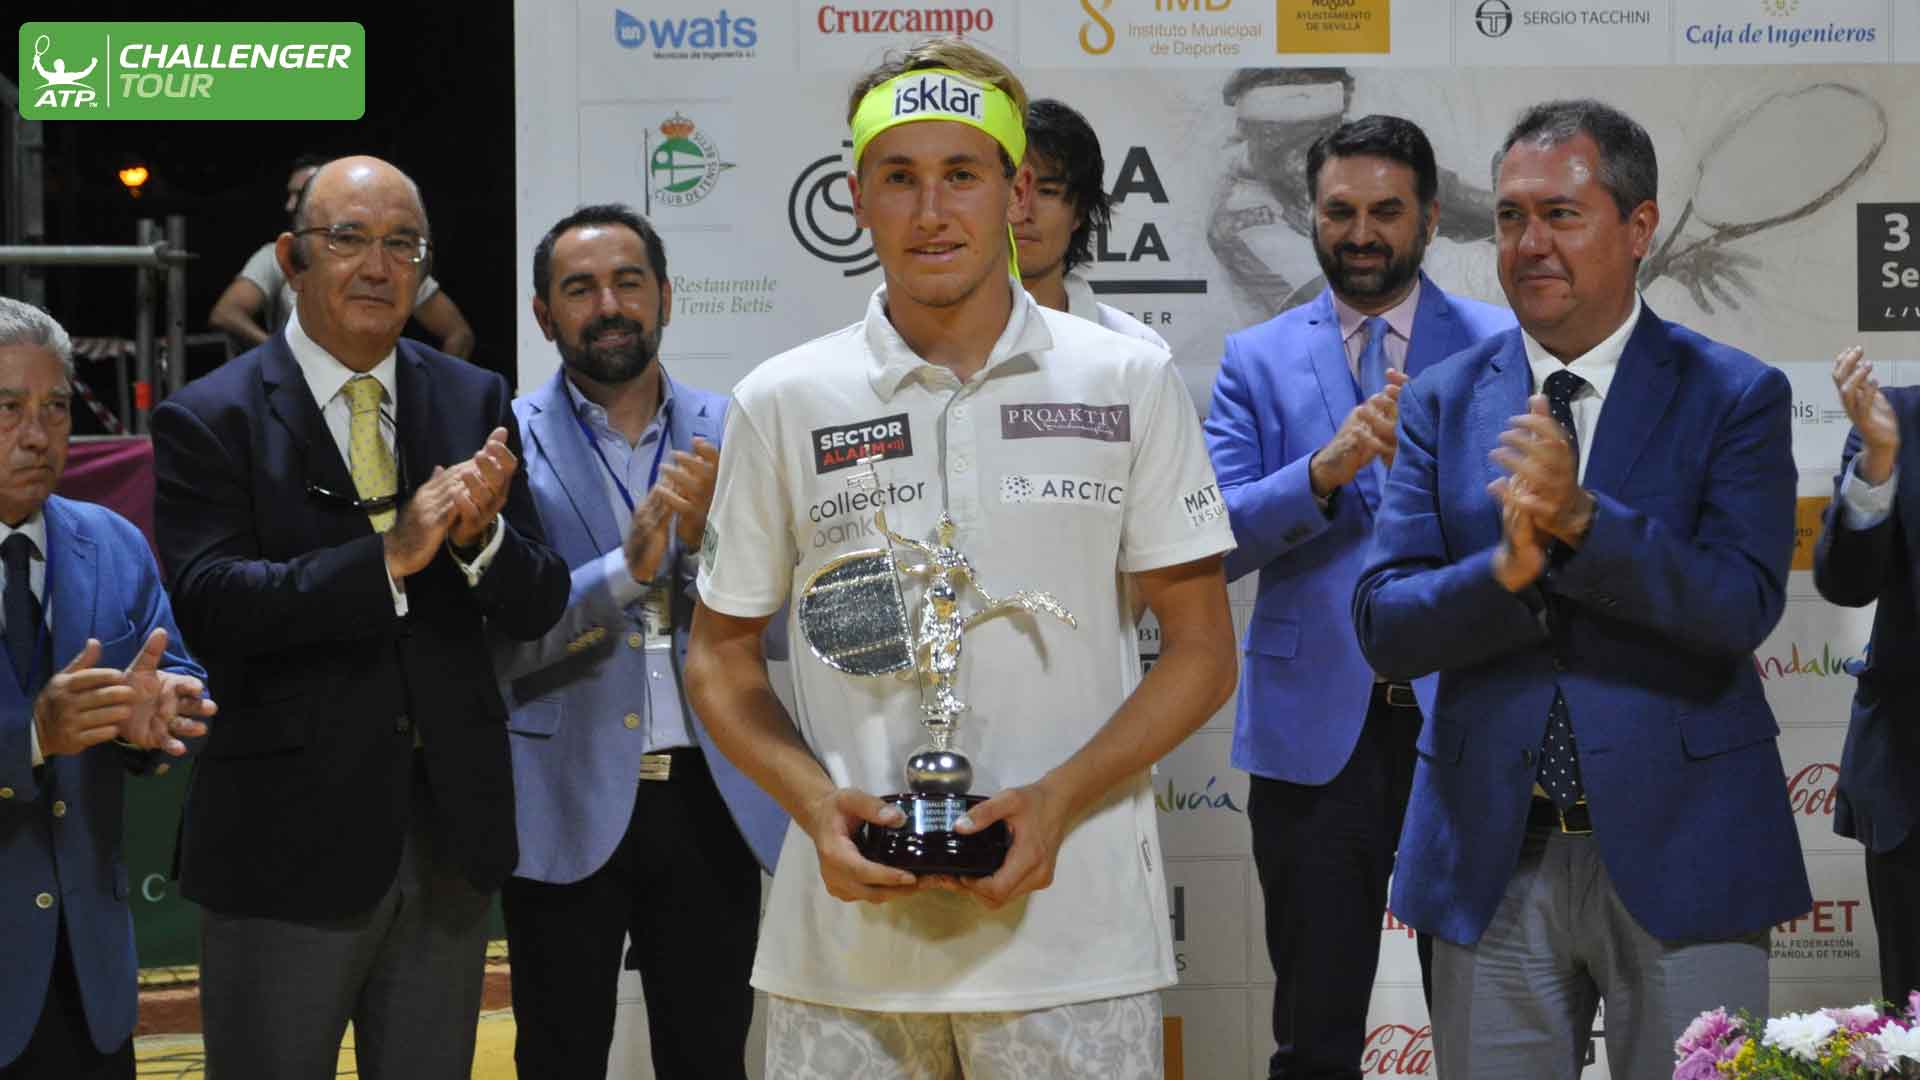 Casper Ruud claims his maiden ATP Challenger Tour title in his first event entered.